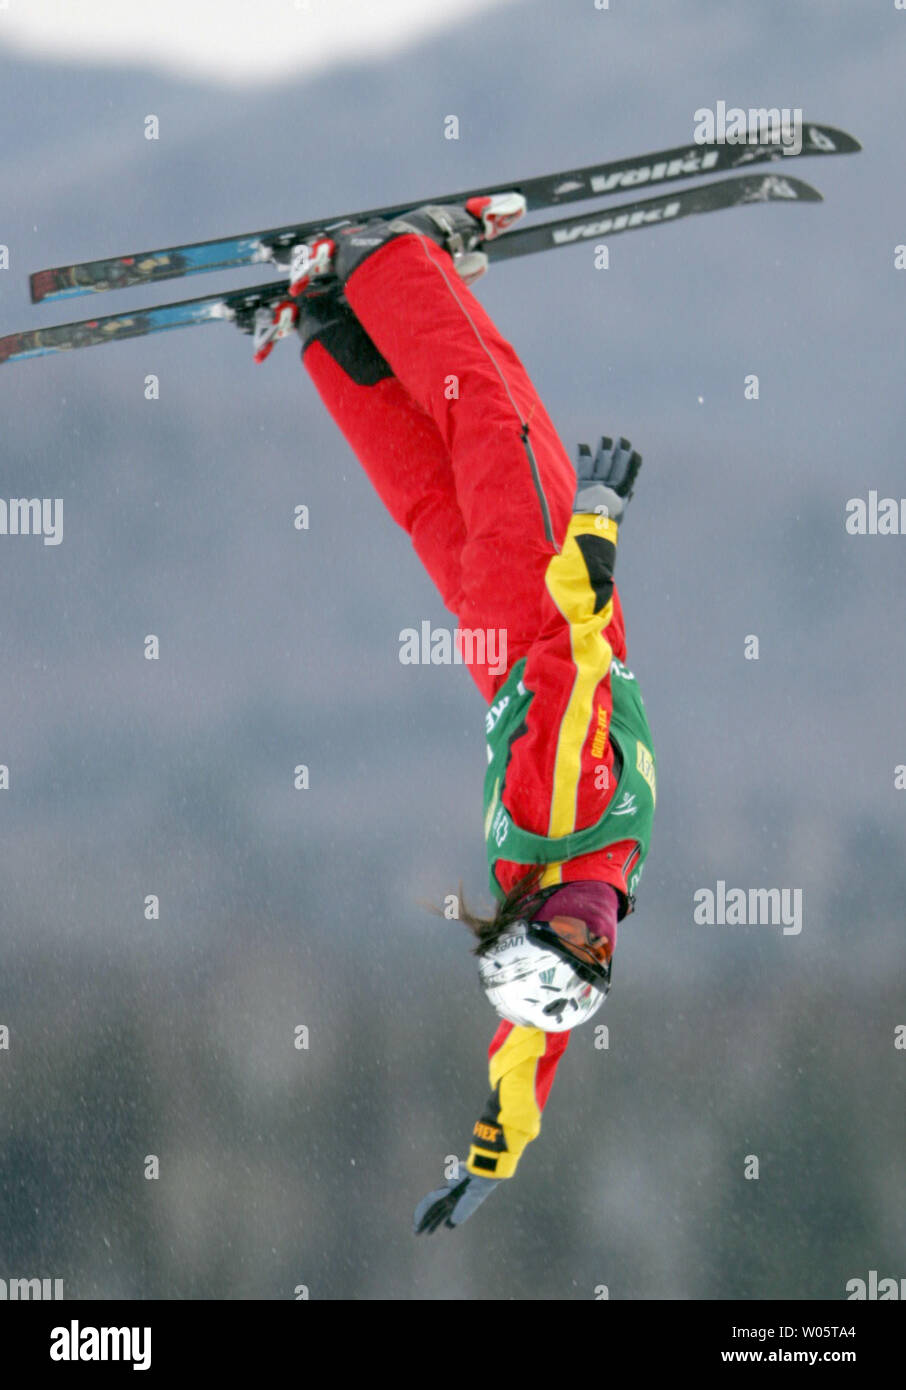 Chinese aerialist Li Nina, 22, performs a triple-twisting double somersault en route to winning the Freestyle World Cup event in Lake Placid, NY on January 16, 2005.  Miss Li, who comes from Shenyang, China, totalled 186.72 points in two jumps to win over #1-ranked Lydia Ierodiaconou of Australia (186.01).  (UPI Photo/Grace Chiu) Stock Photo